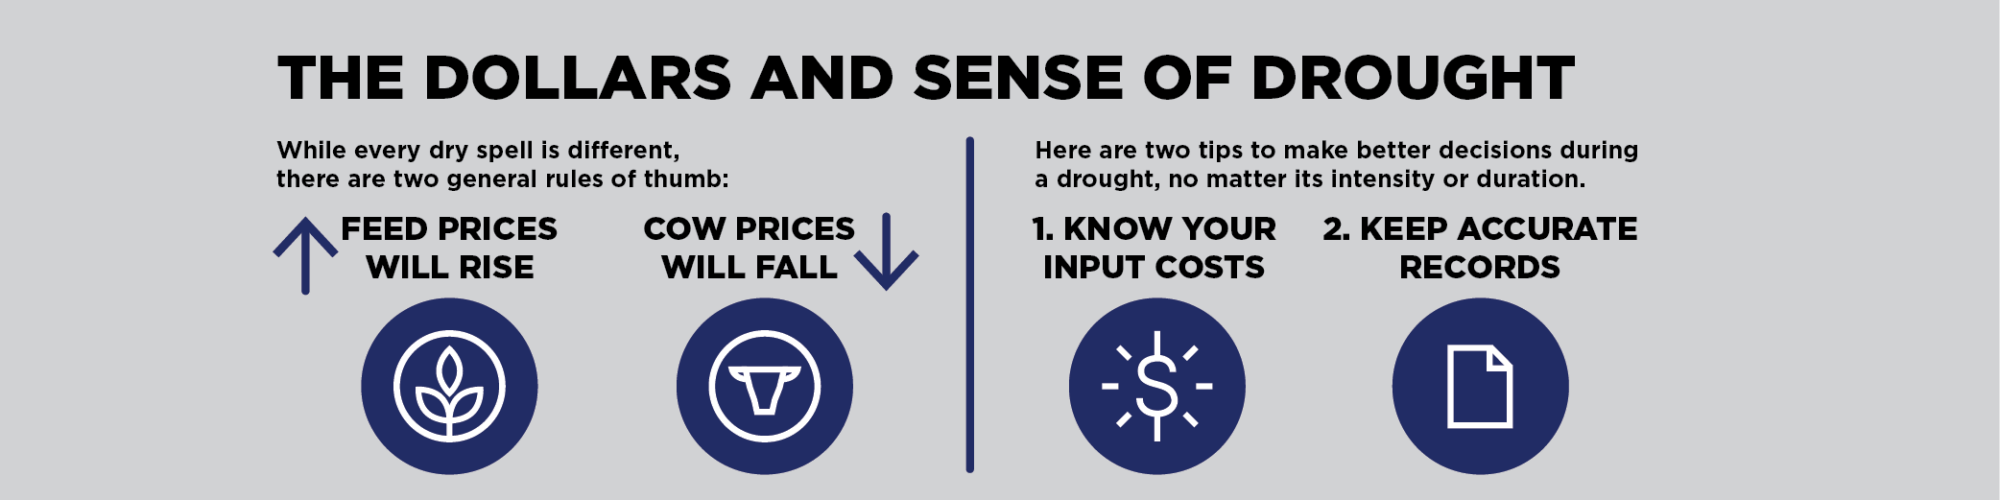 The dollars and sense of drought: 
While every dry spell in different, there are two general rules of thumb: 
Feed prices will rise, and cow prices will fall. 
Here are two tips to make better decisions during a drought, no matter its intensity or duration: 
1. Know your input costs. 
2. Keep accurate records.